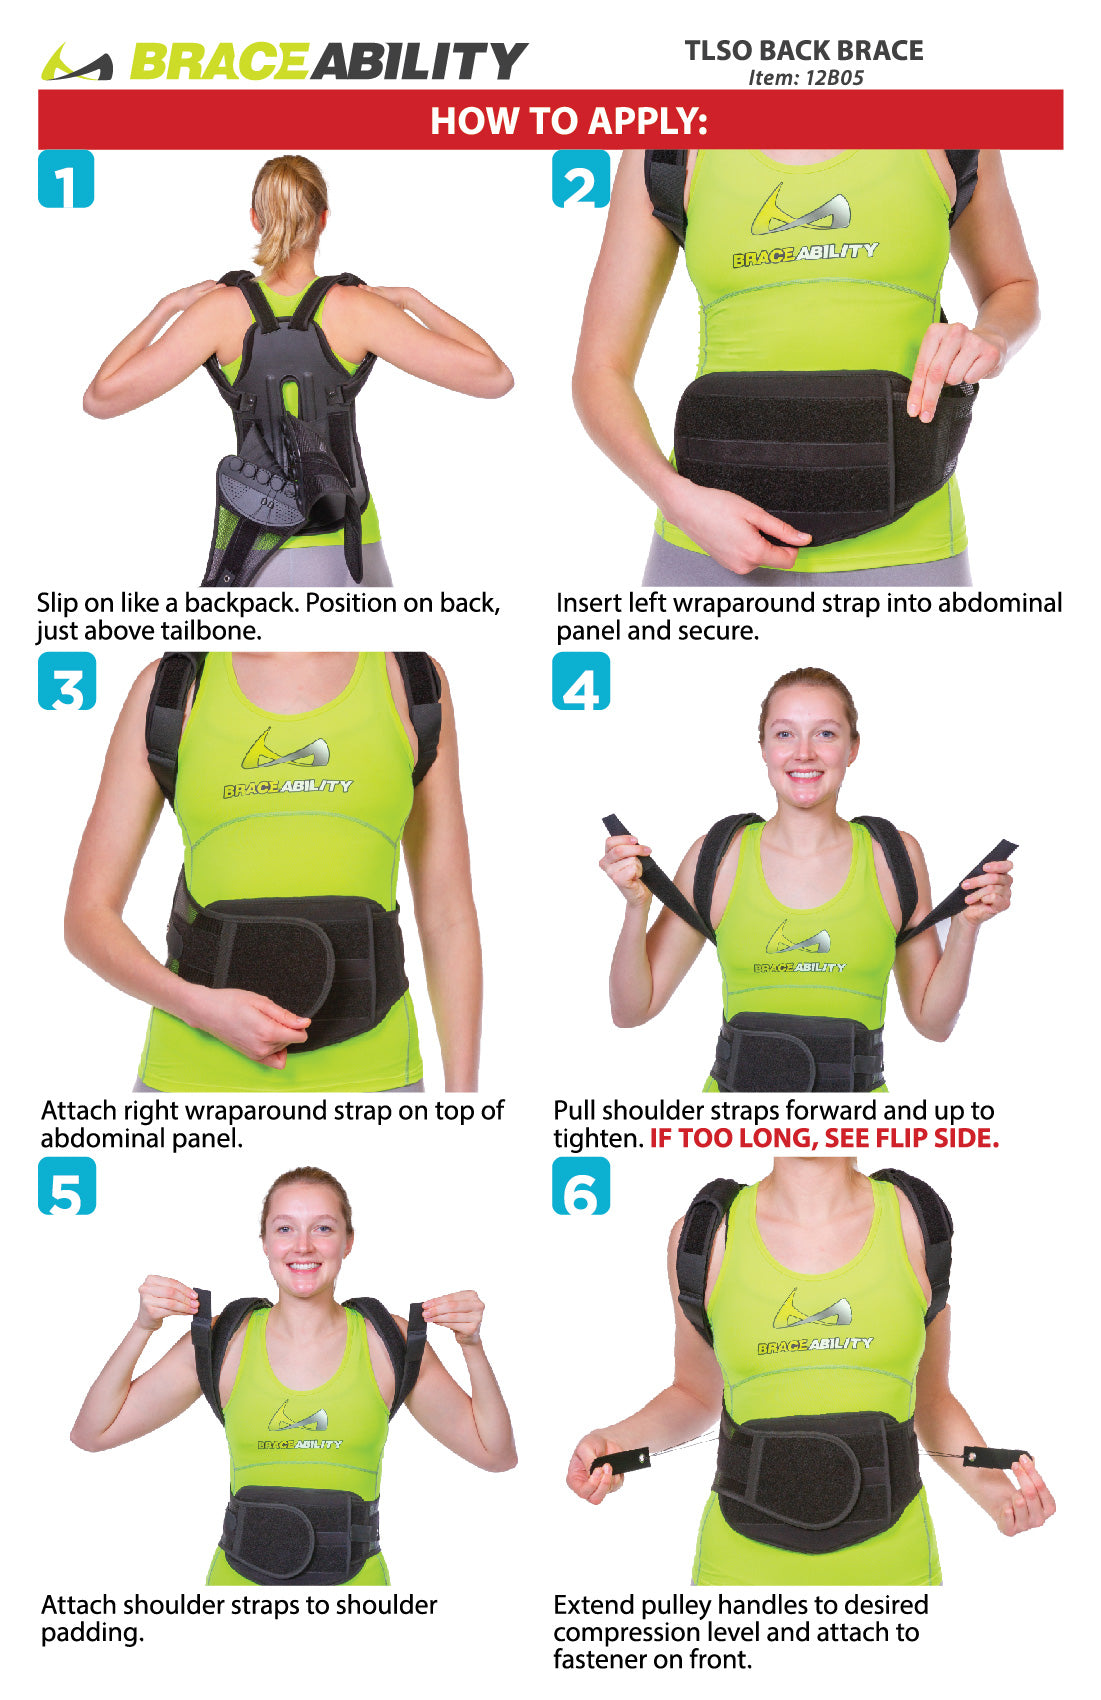 instruction sheet for how to put on the tlso back brace